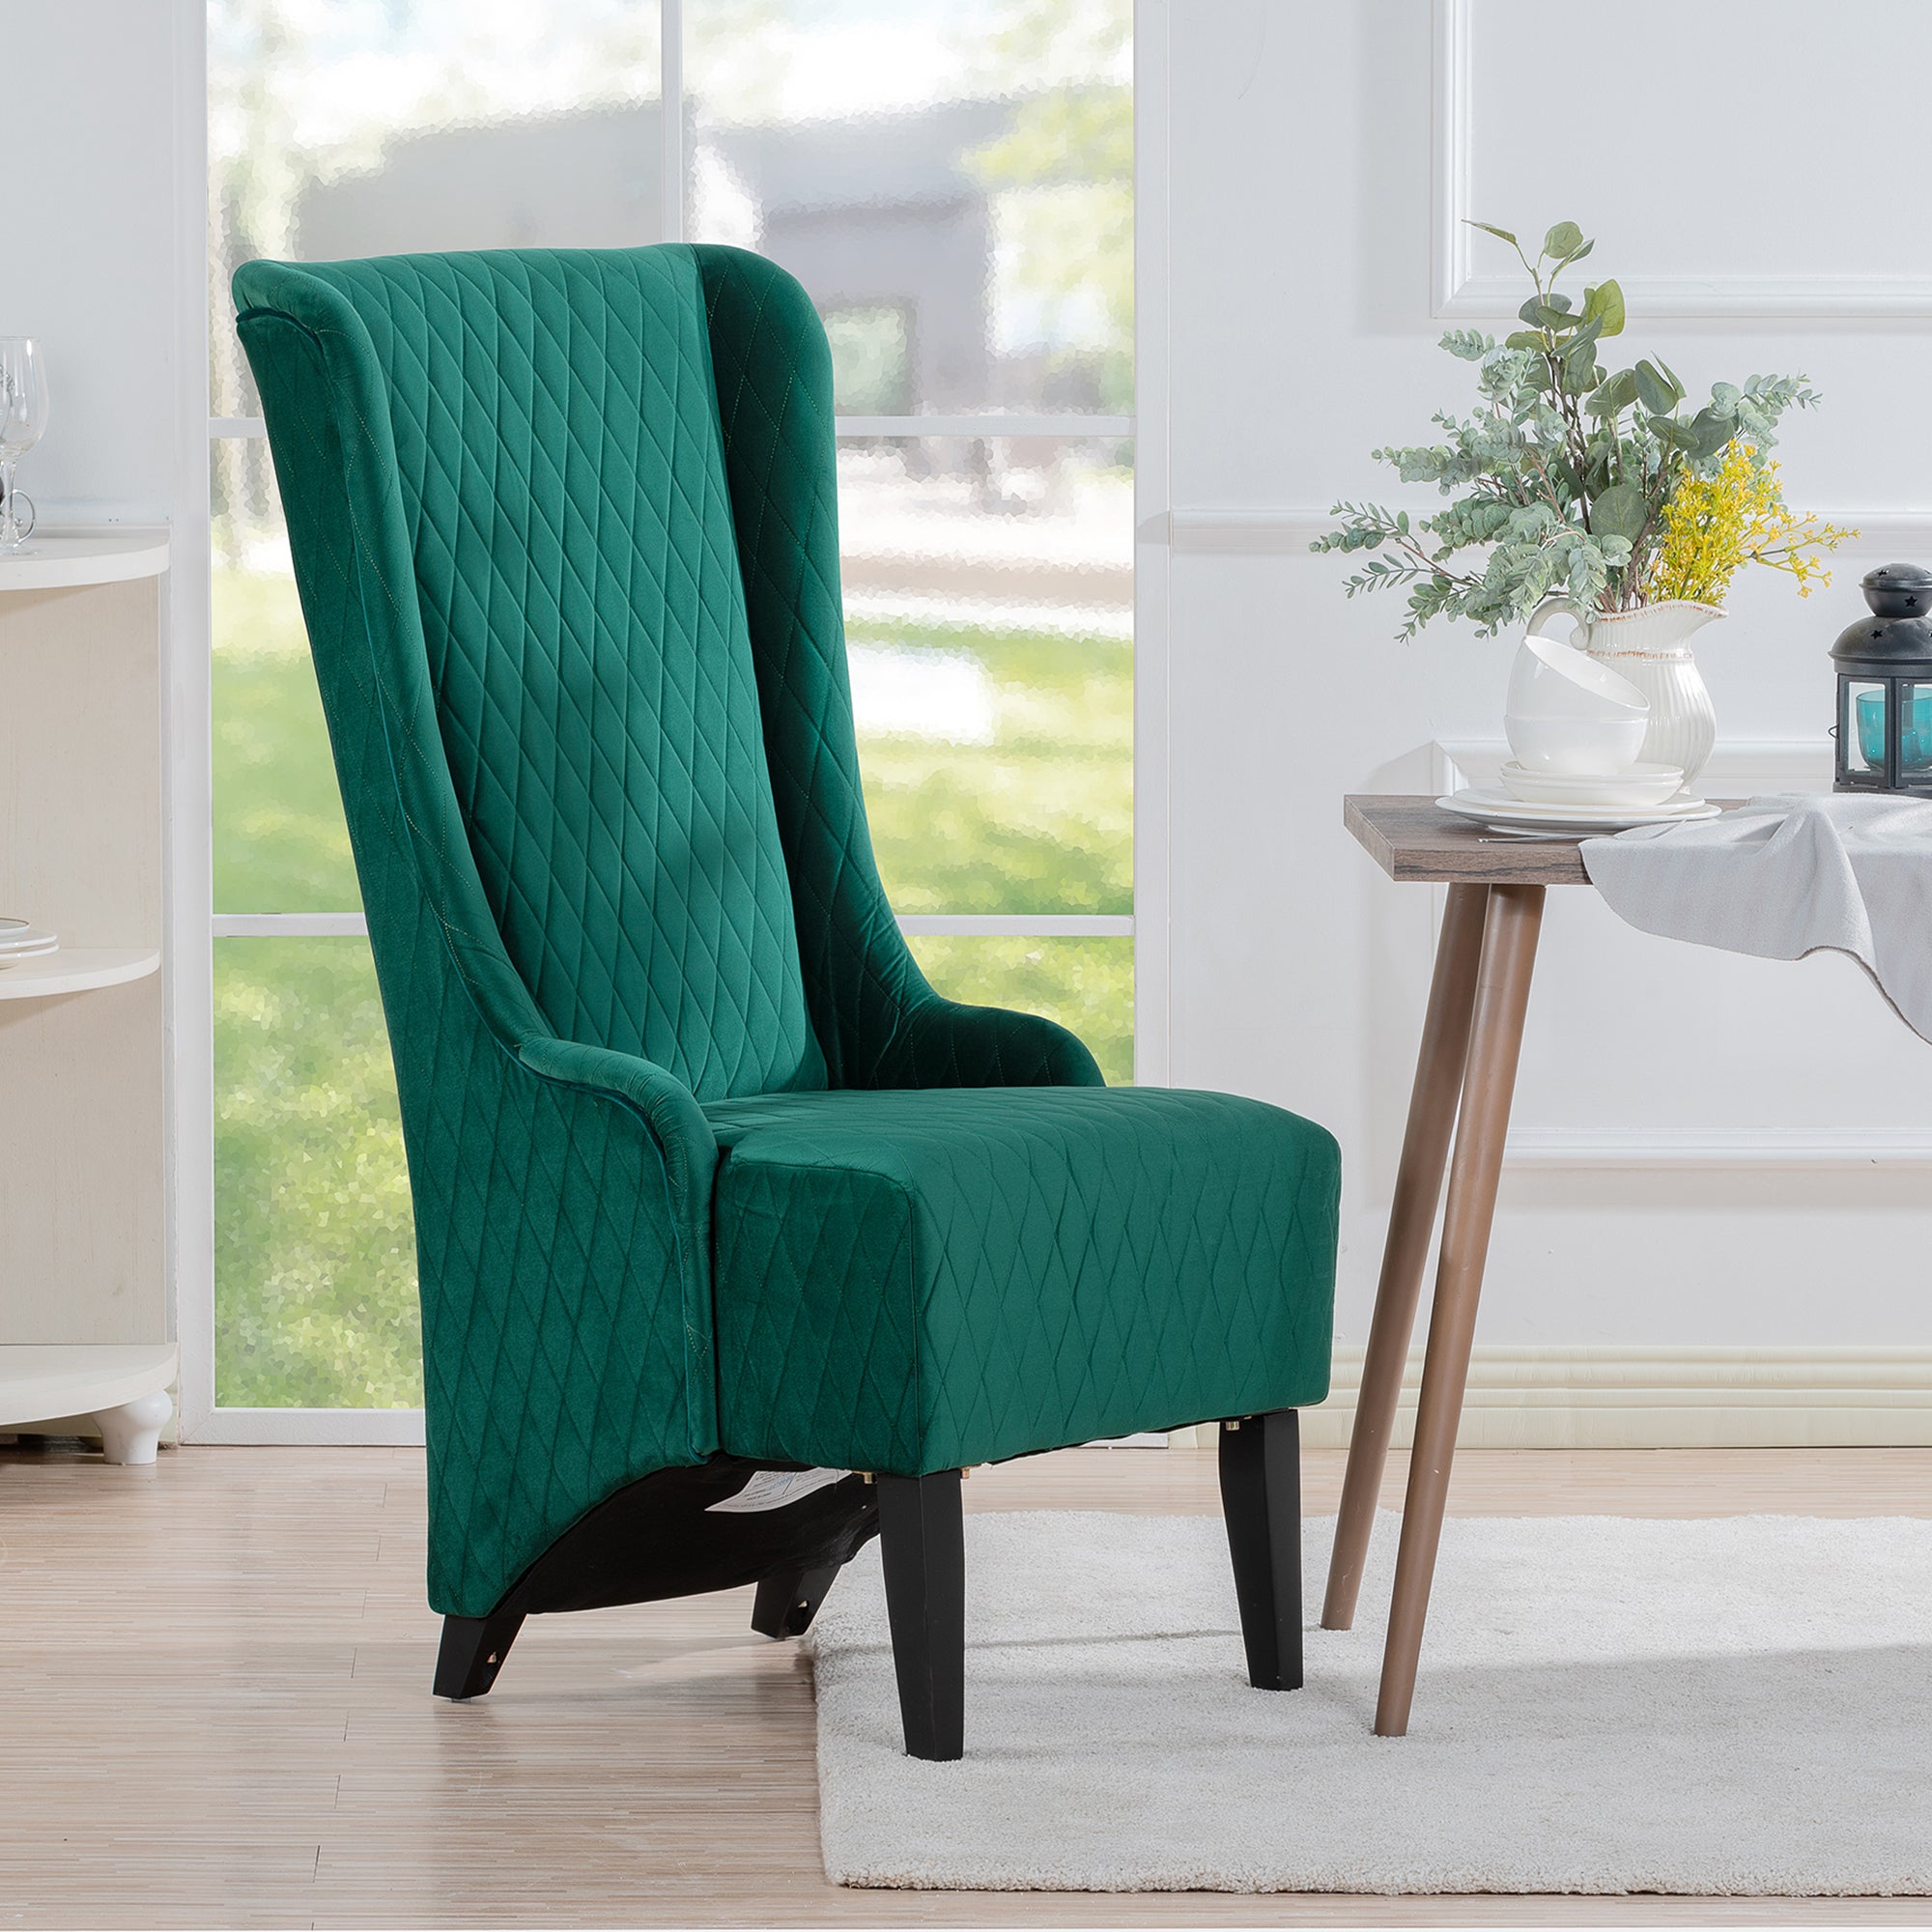 23.03" Wide High Back Velvet Accent Chair, Comfy High retro green-fabric